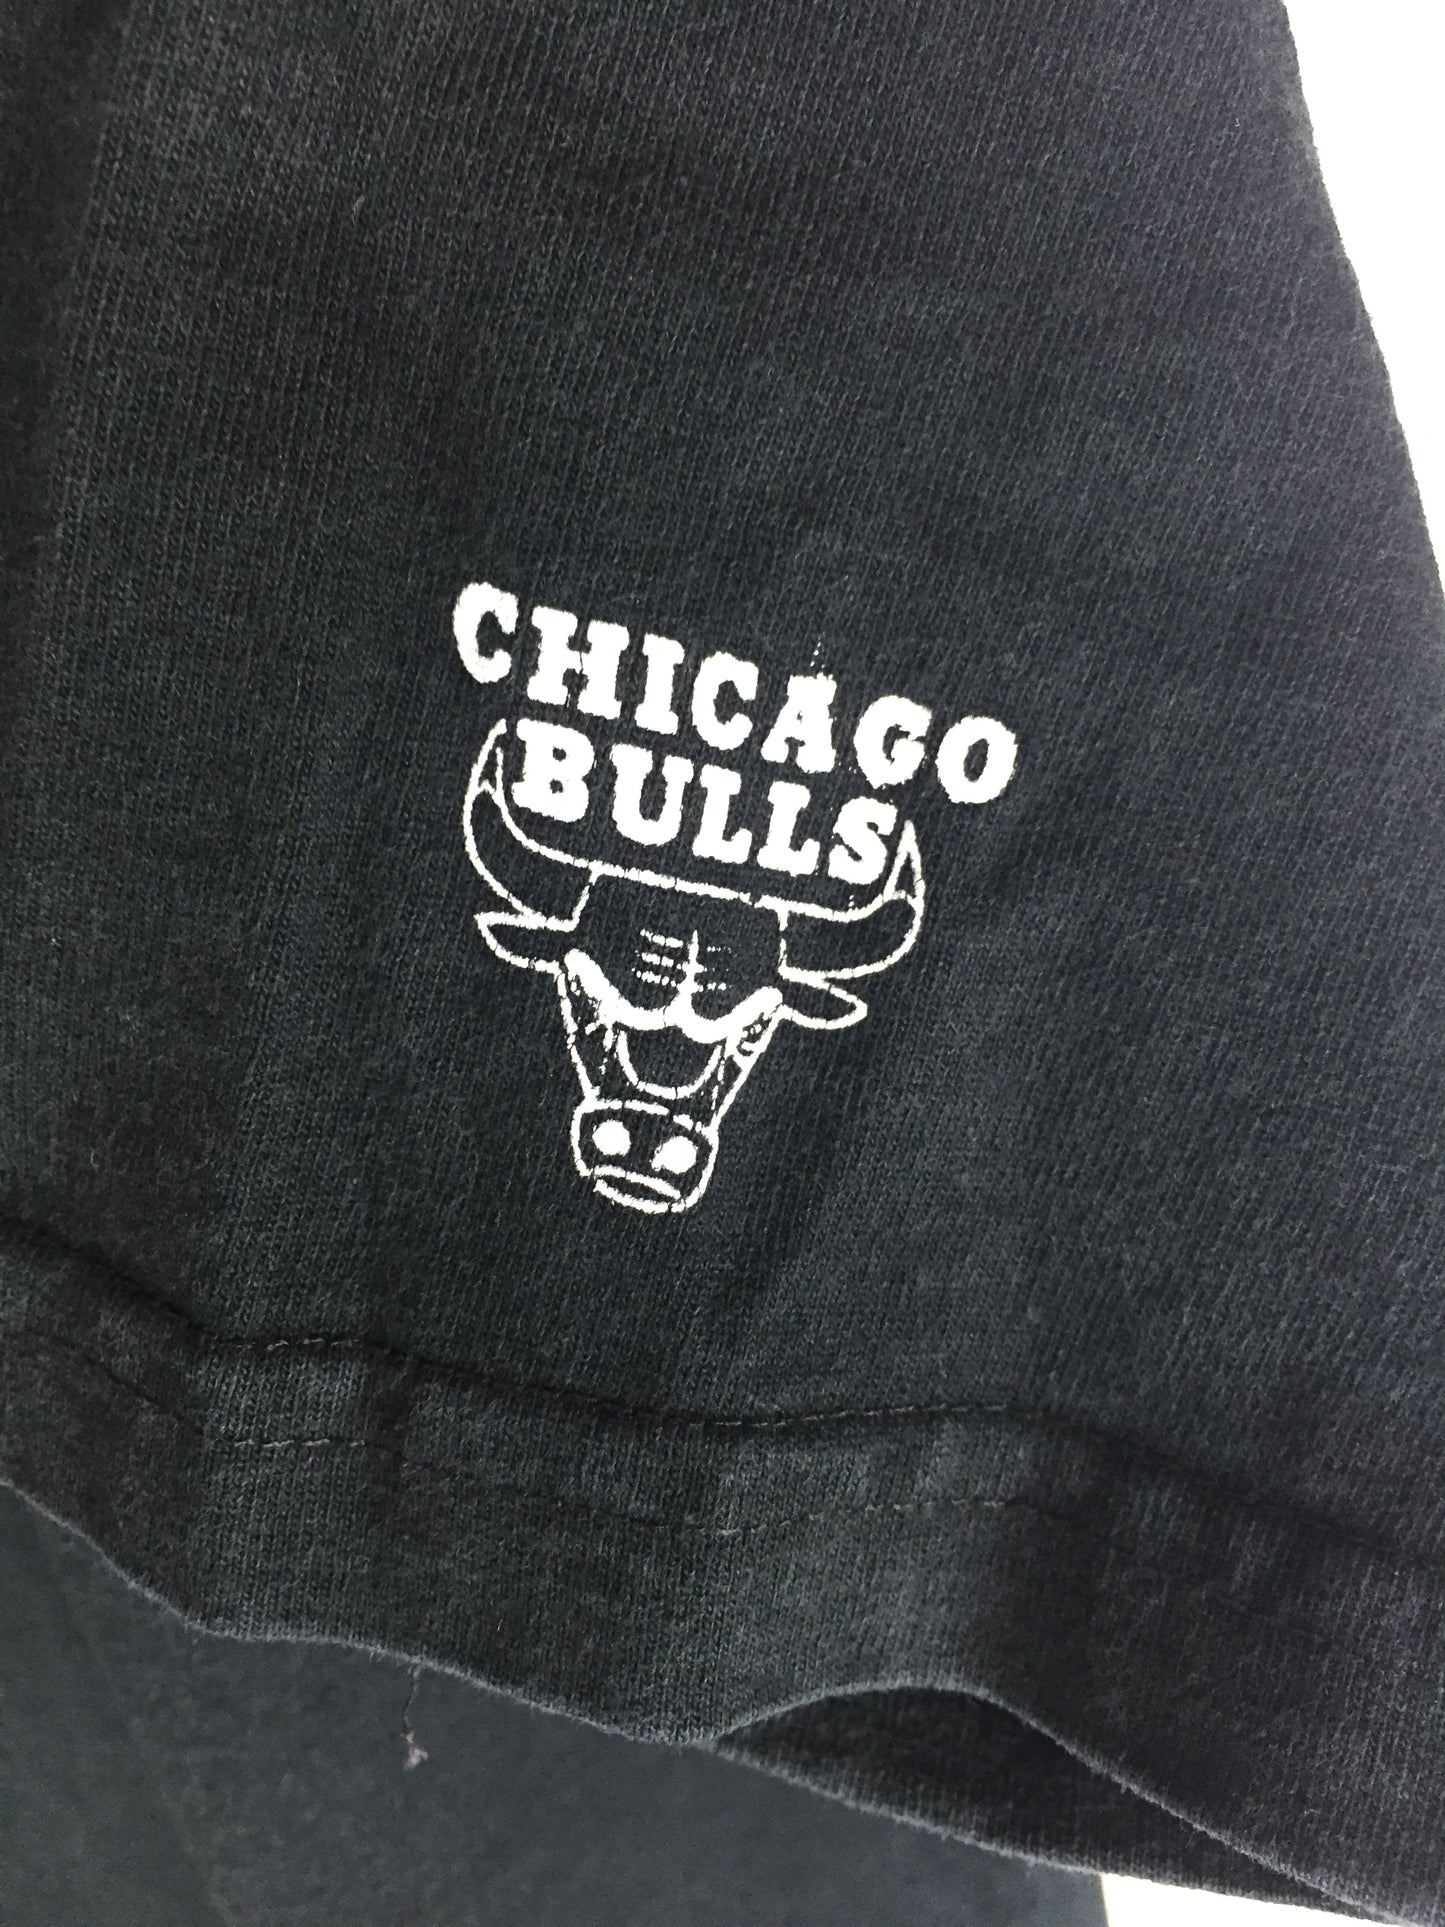 Vintage Chicago Bulls 90's embroidered NBA T-shirt